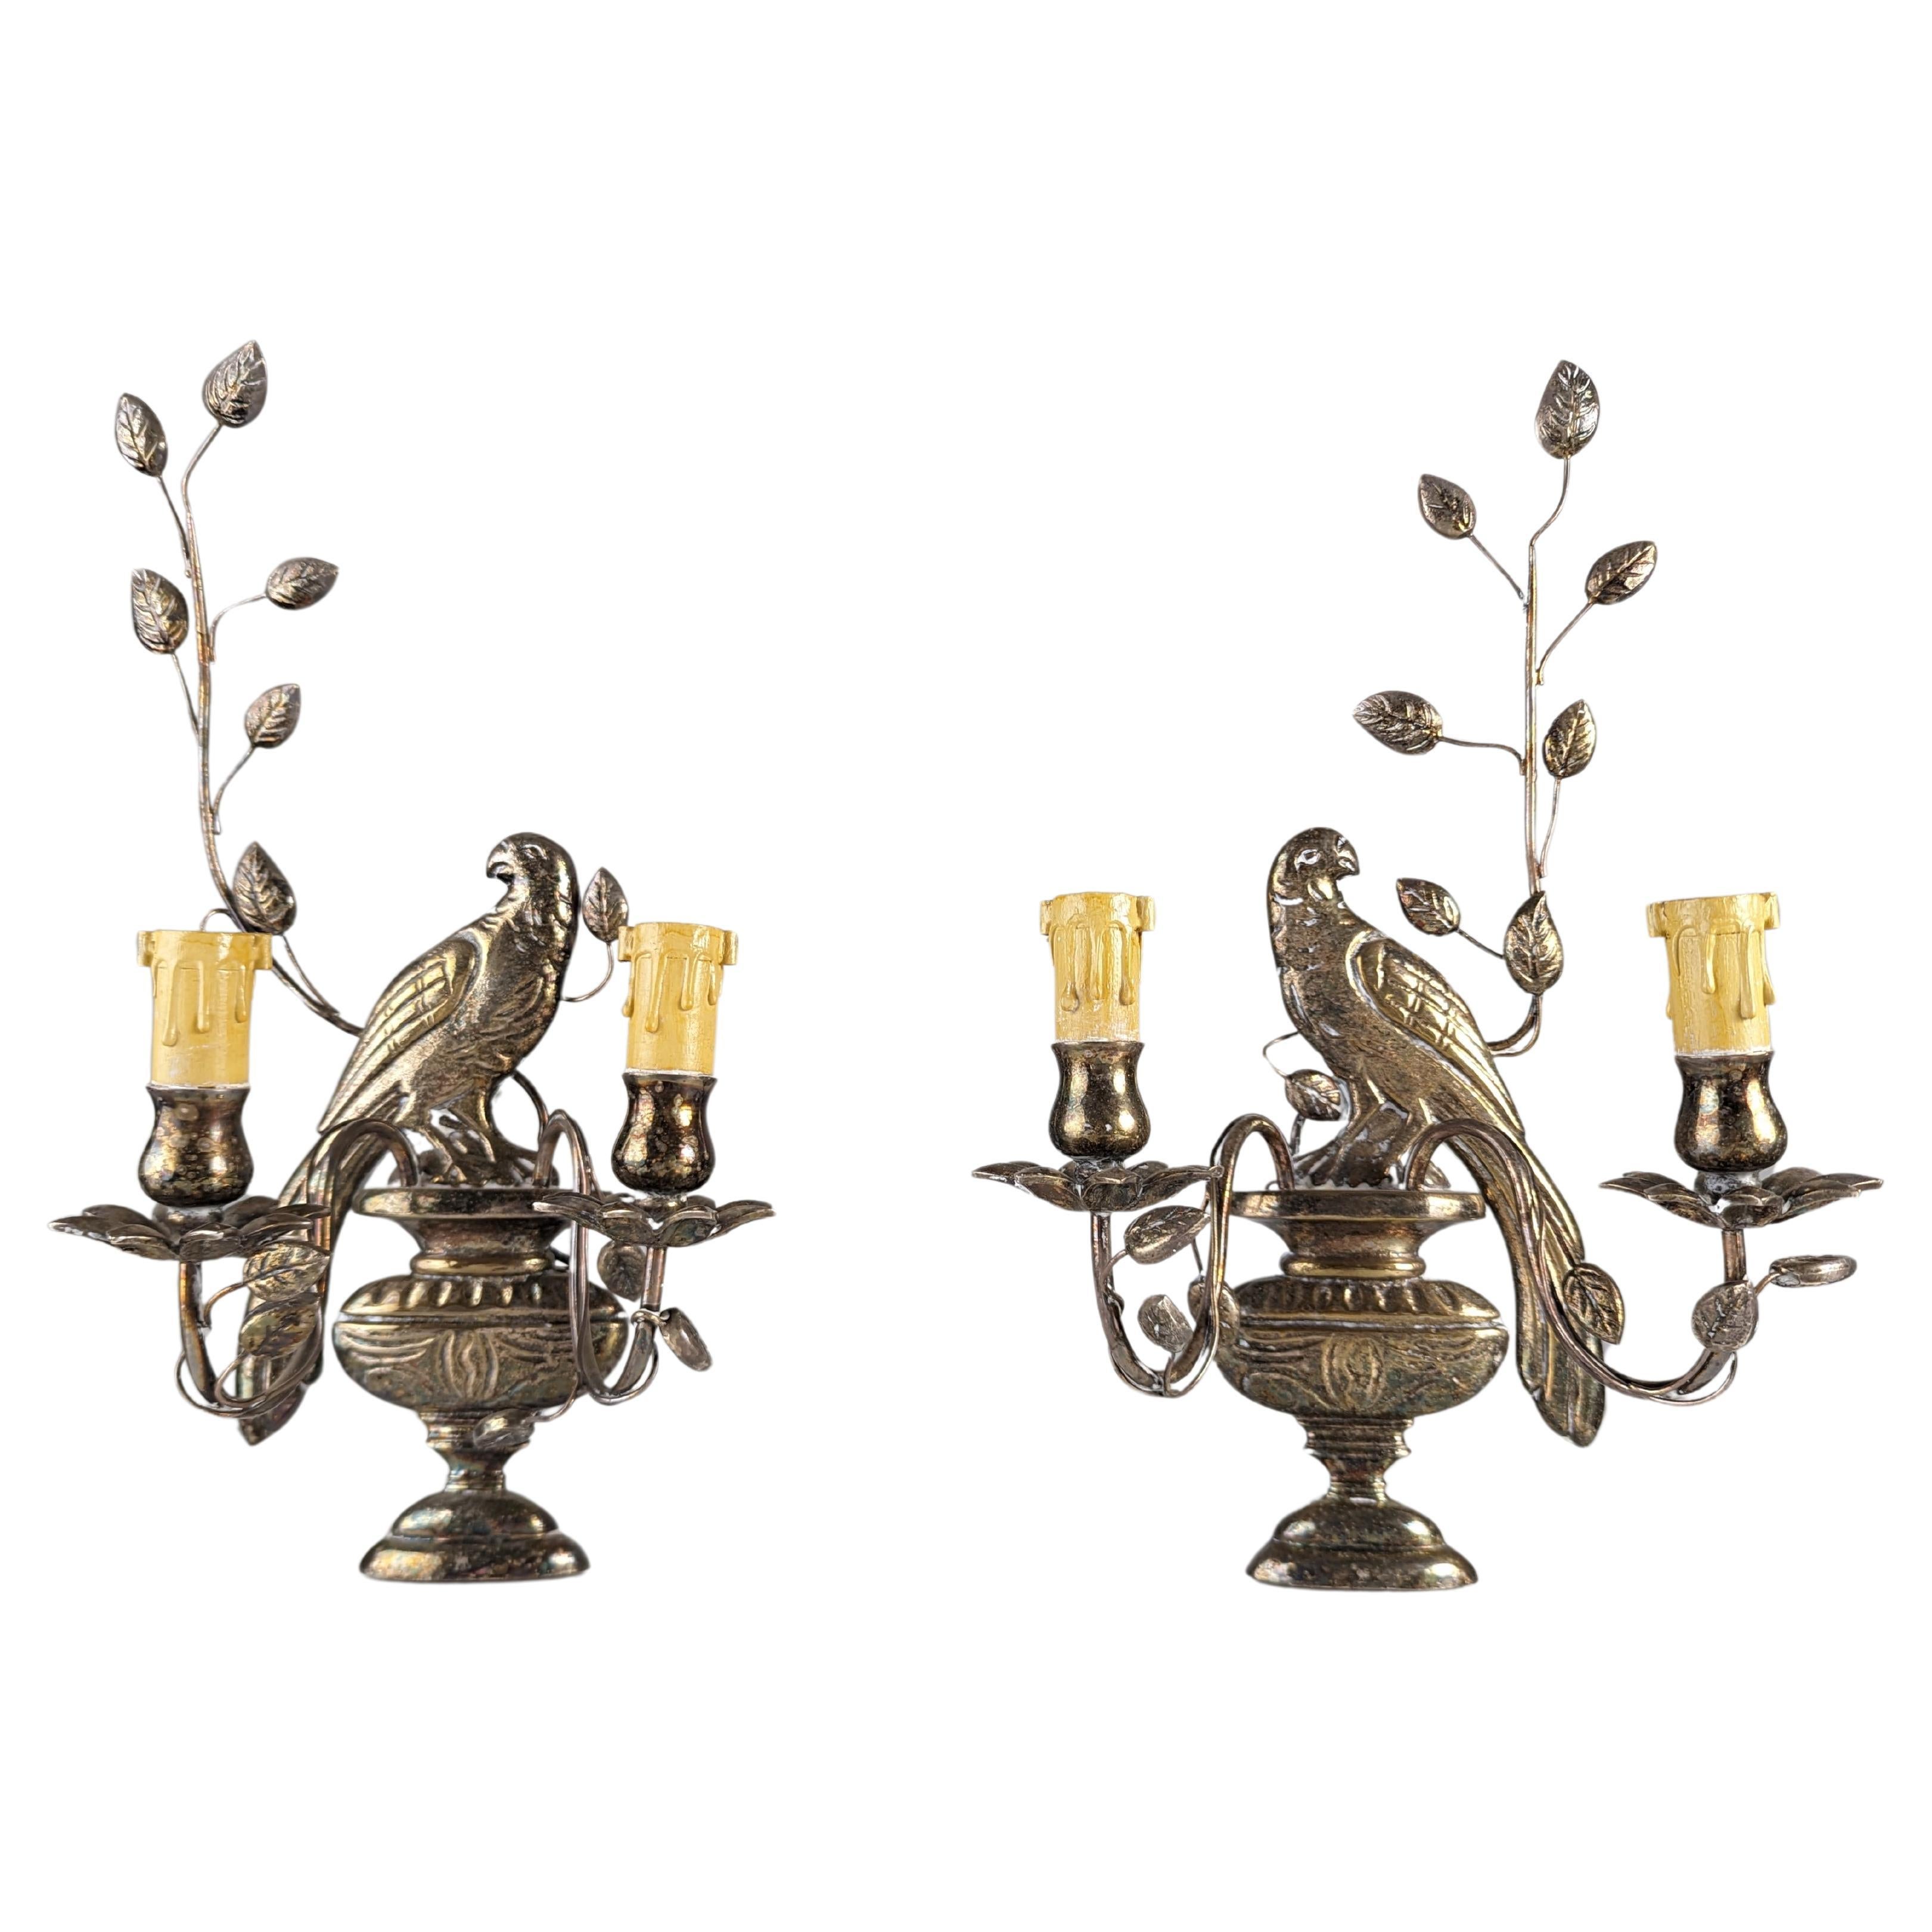 Pair of wall sconces with parrots and leaves by Maison Bagues.